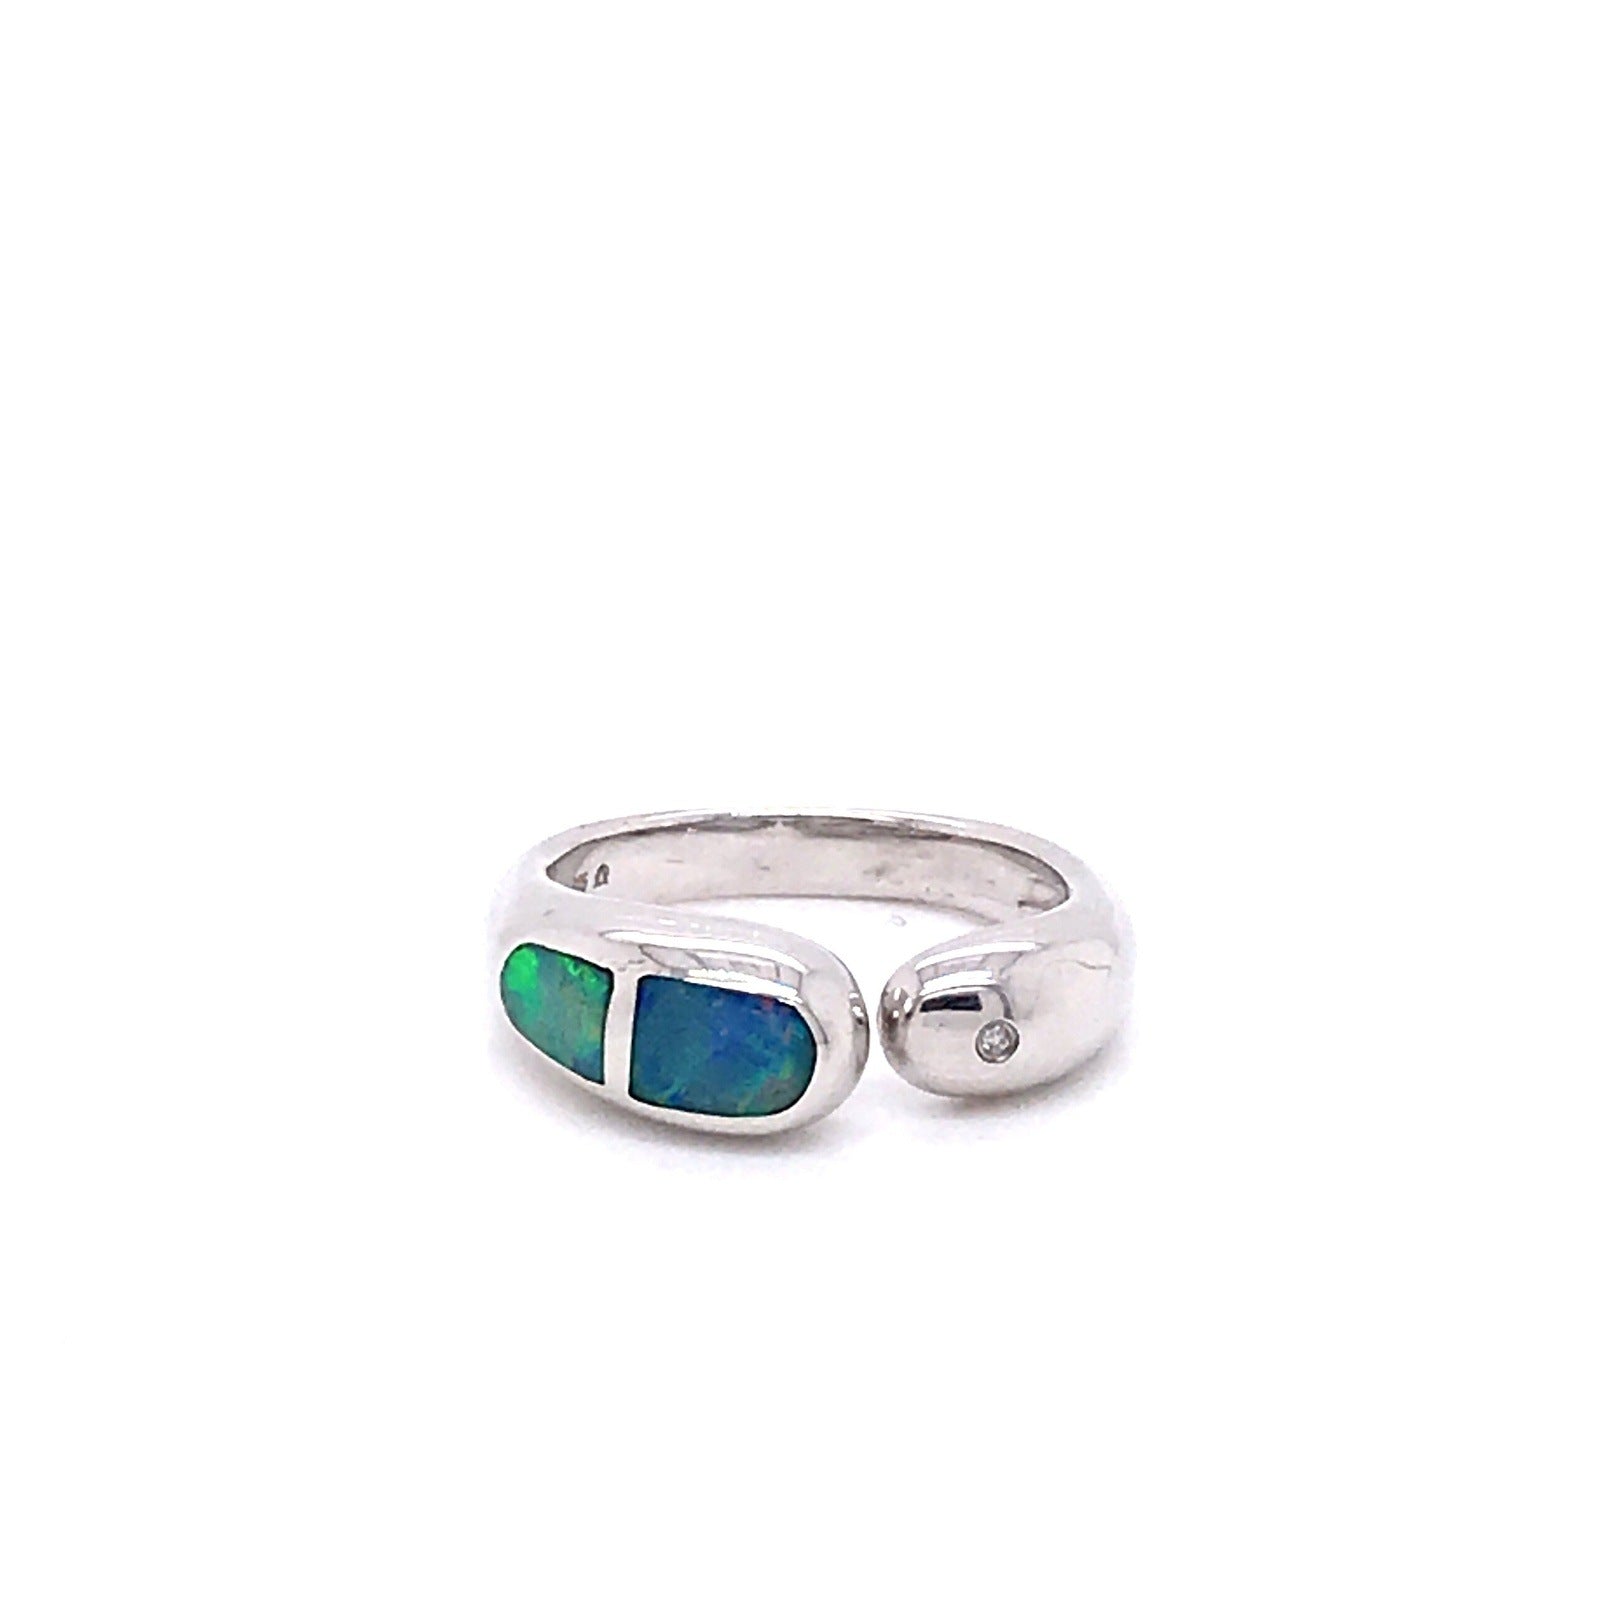 Nice and Smooth Australian Opal Ring - Sheila Marie Opals